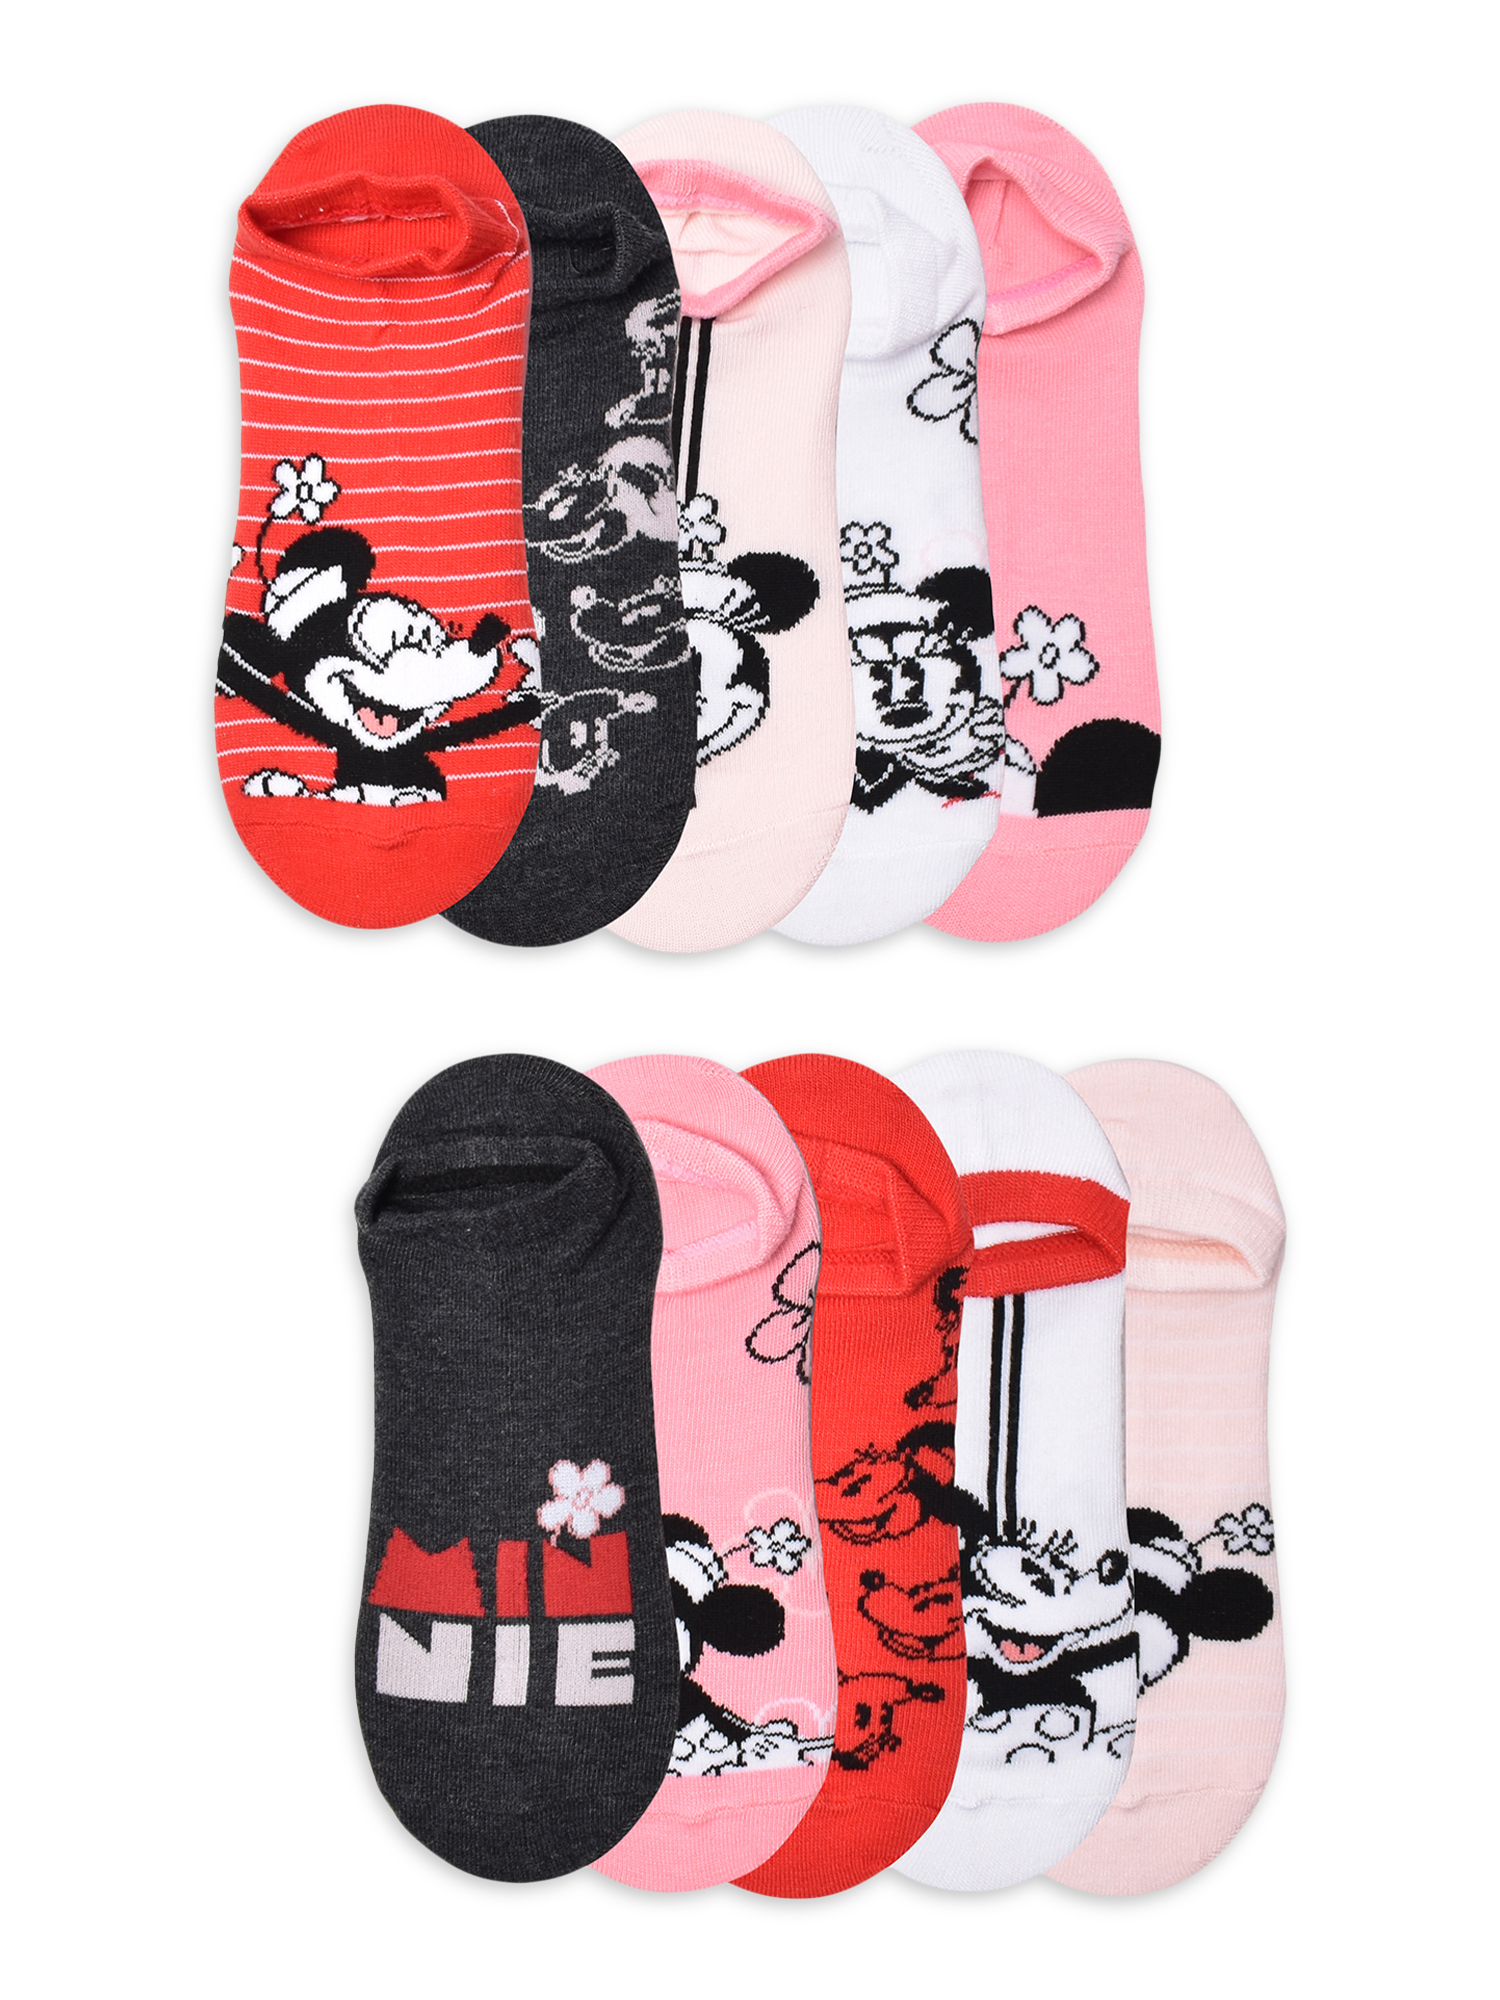 Disney Minnie Mouse Womens Graphic Super No Show Socks, 10-Pack, Sizes 4-10 - image 1 of 5